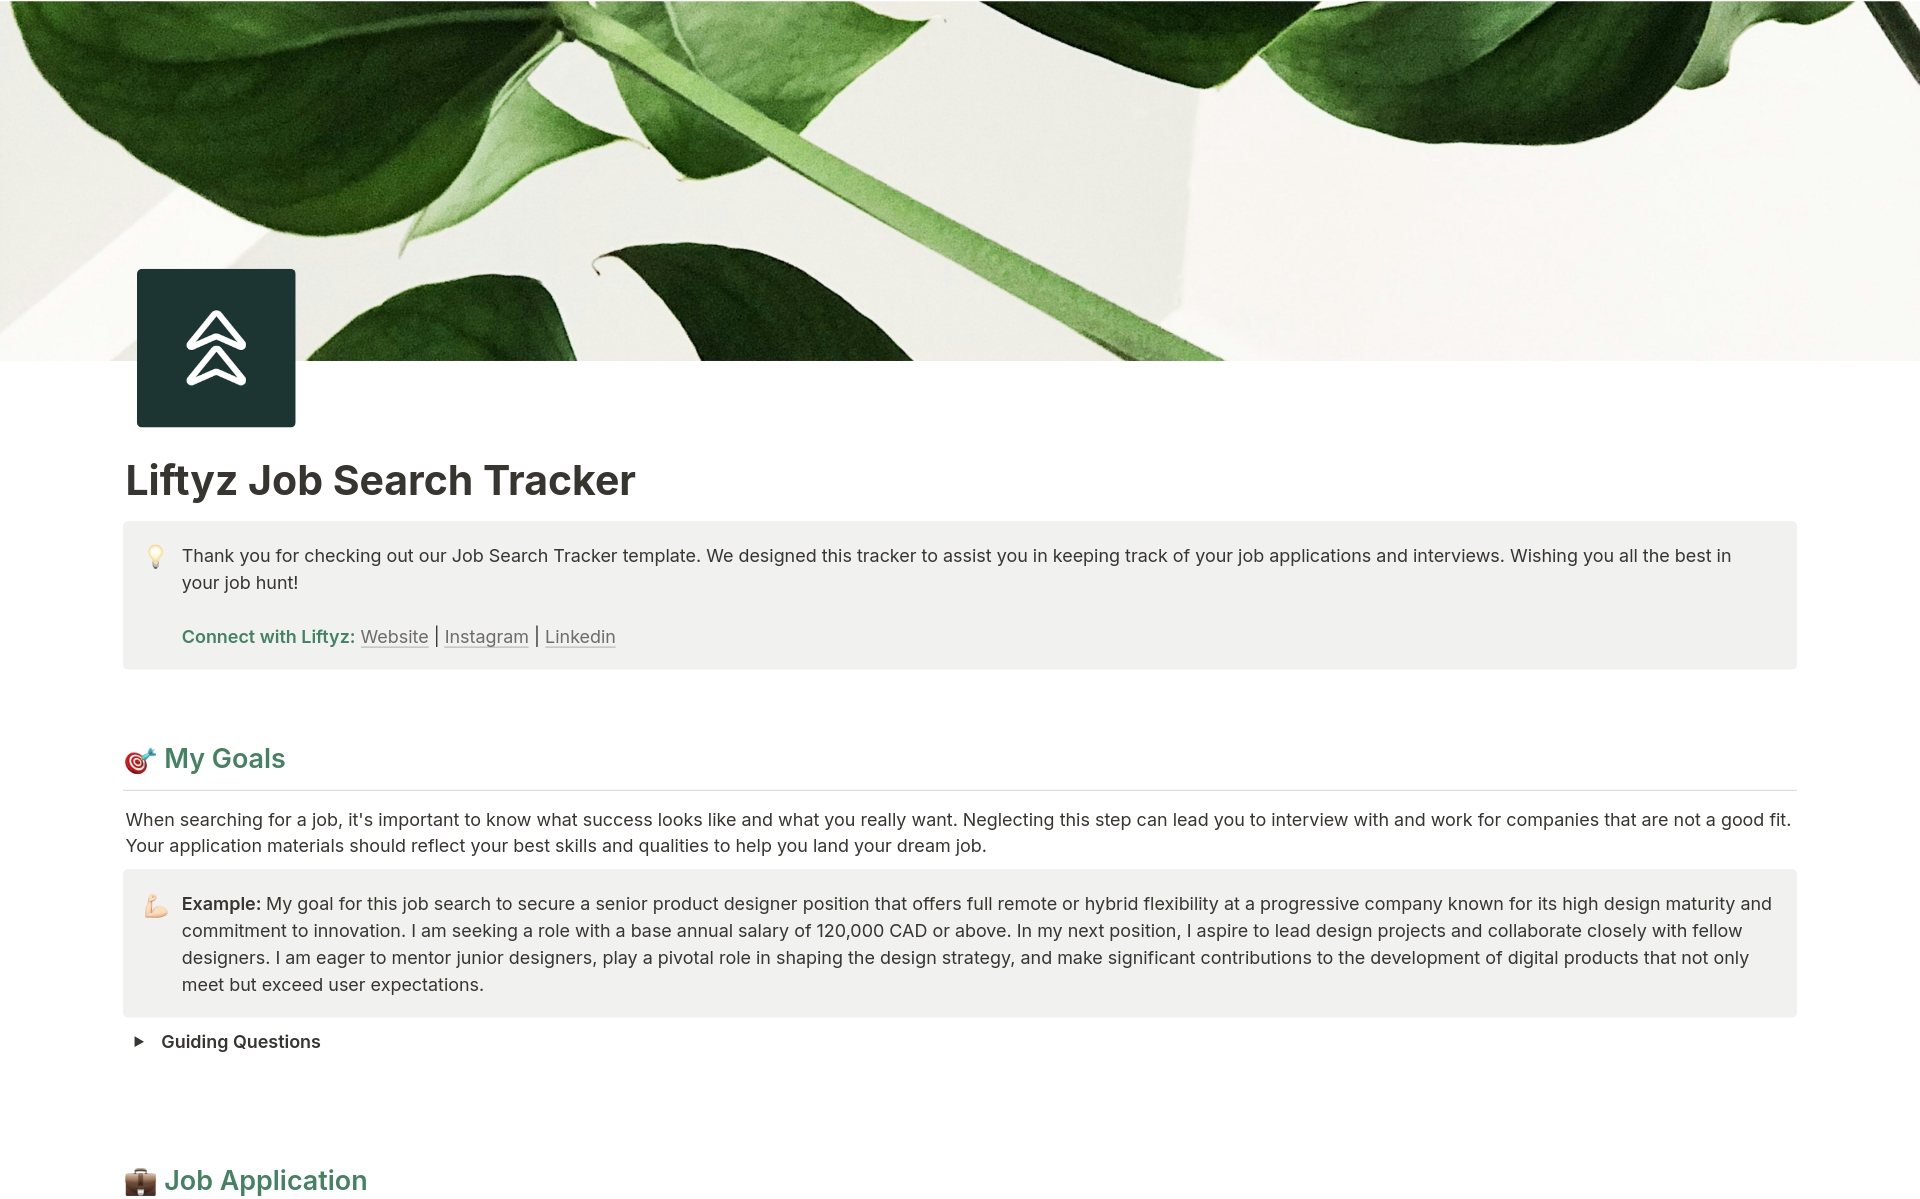 A simple job search tracker that helps you define your job search goals with guiding questions and keeps track of your job applications.